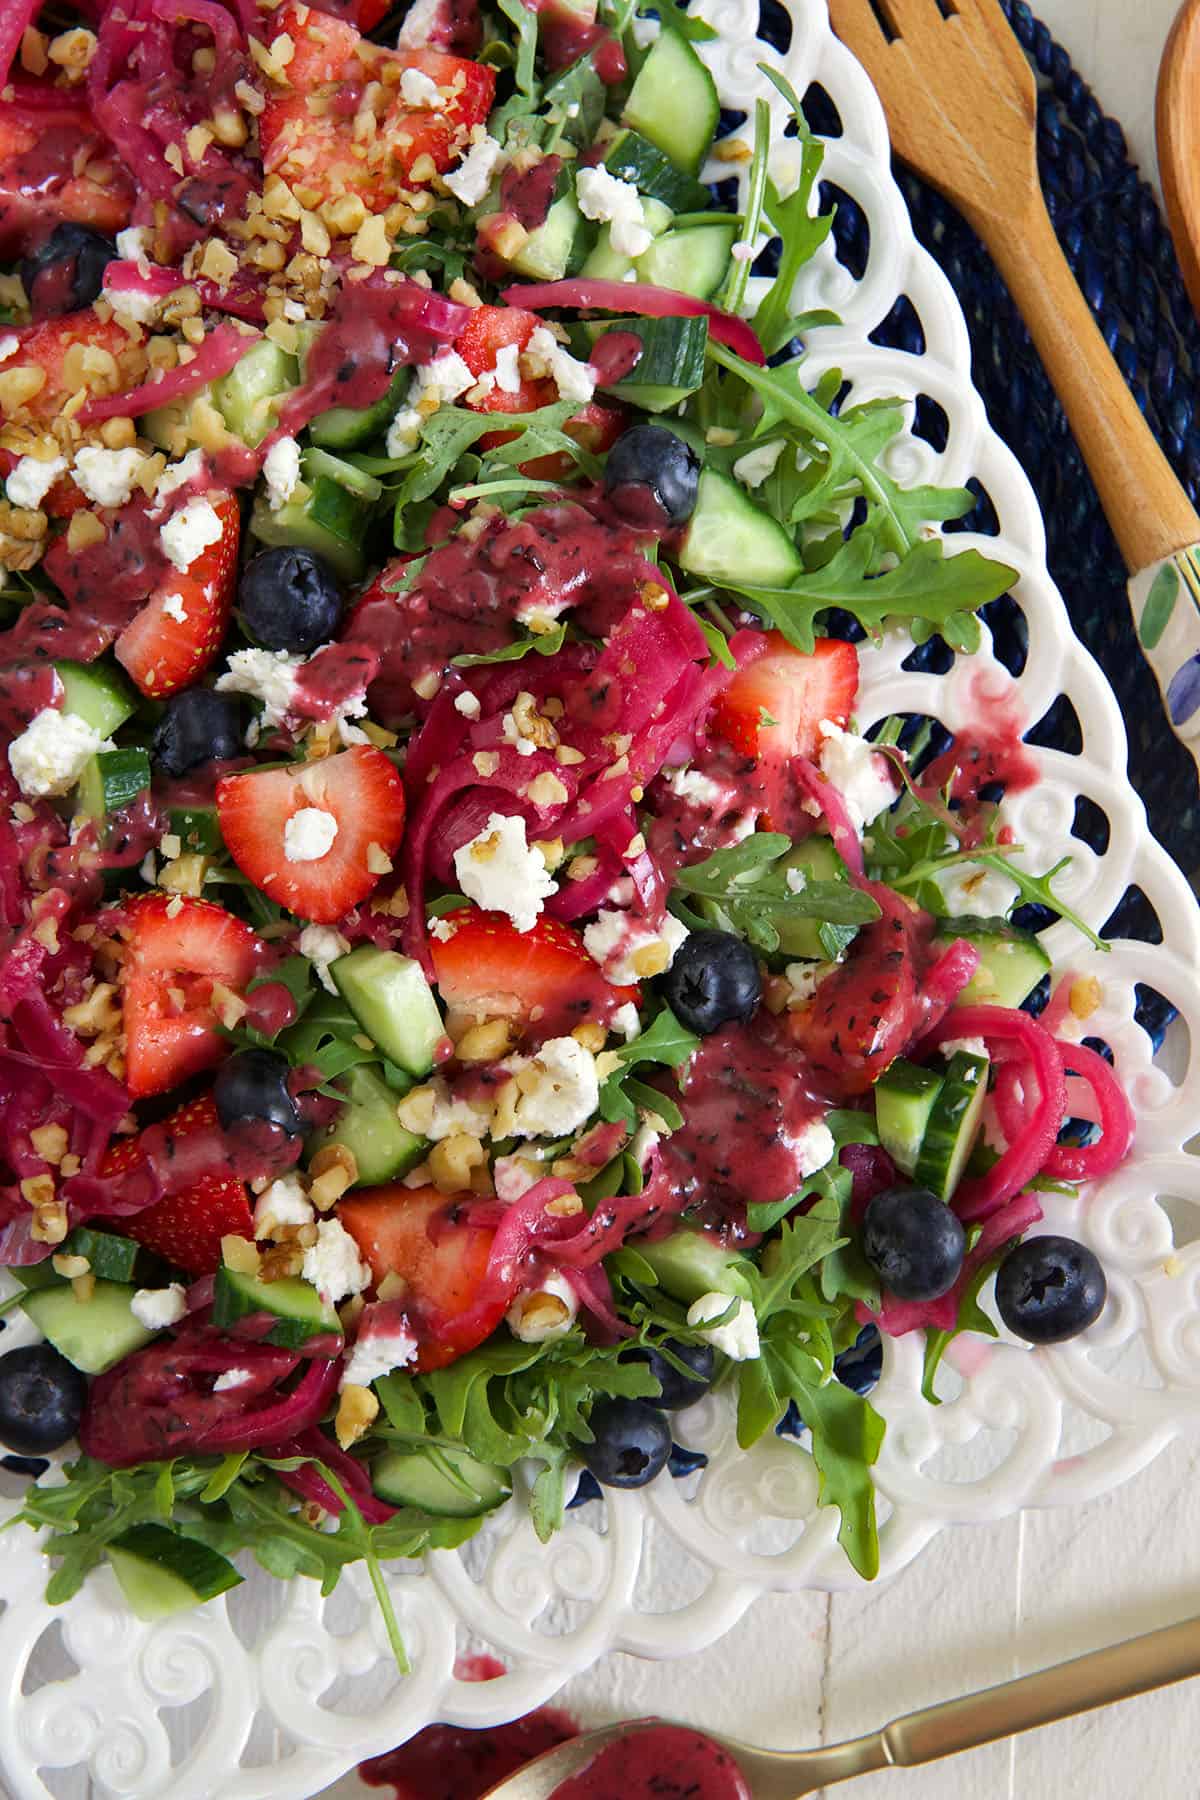 Vinaigrette is drizzled on top of a strawberry arugula salad.